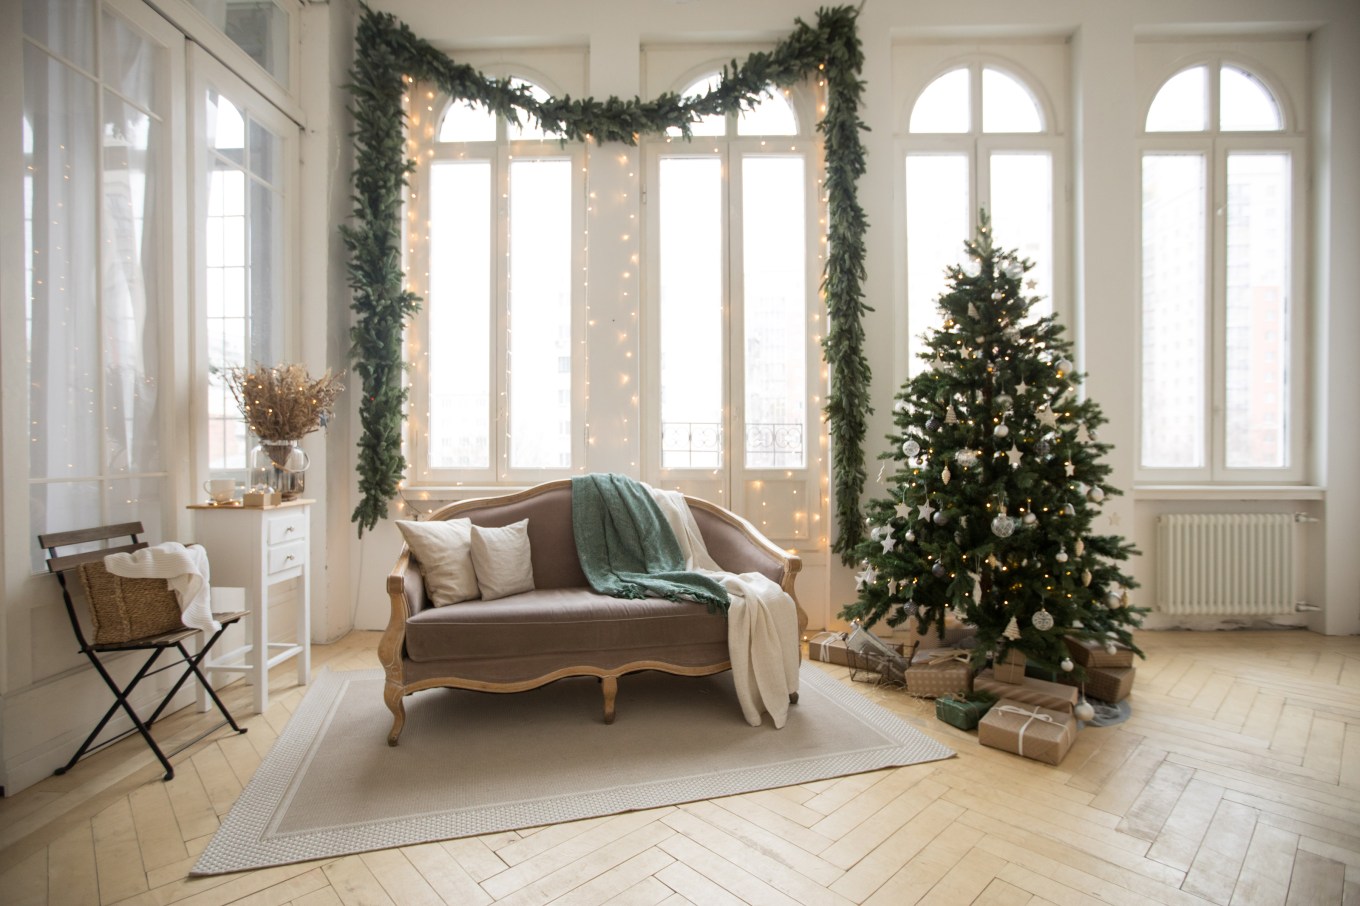 A pretty Christmas tree stands in a mostly undecorated living room, representing a simple, minimalist decorating style.